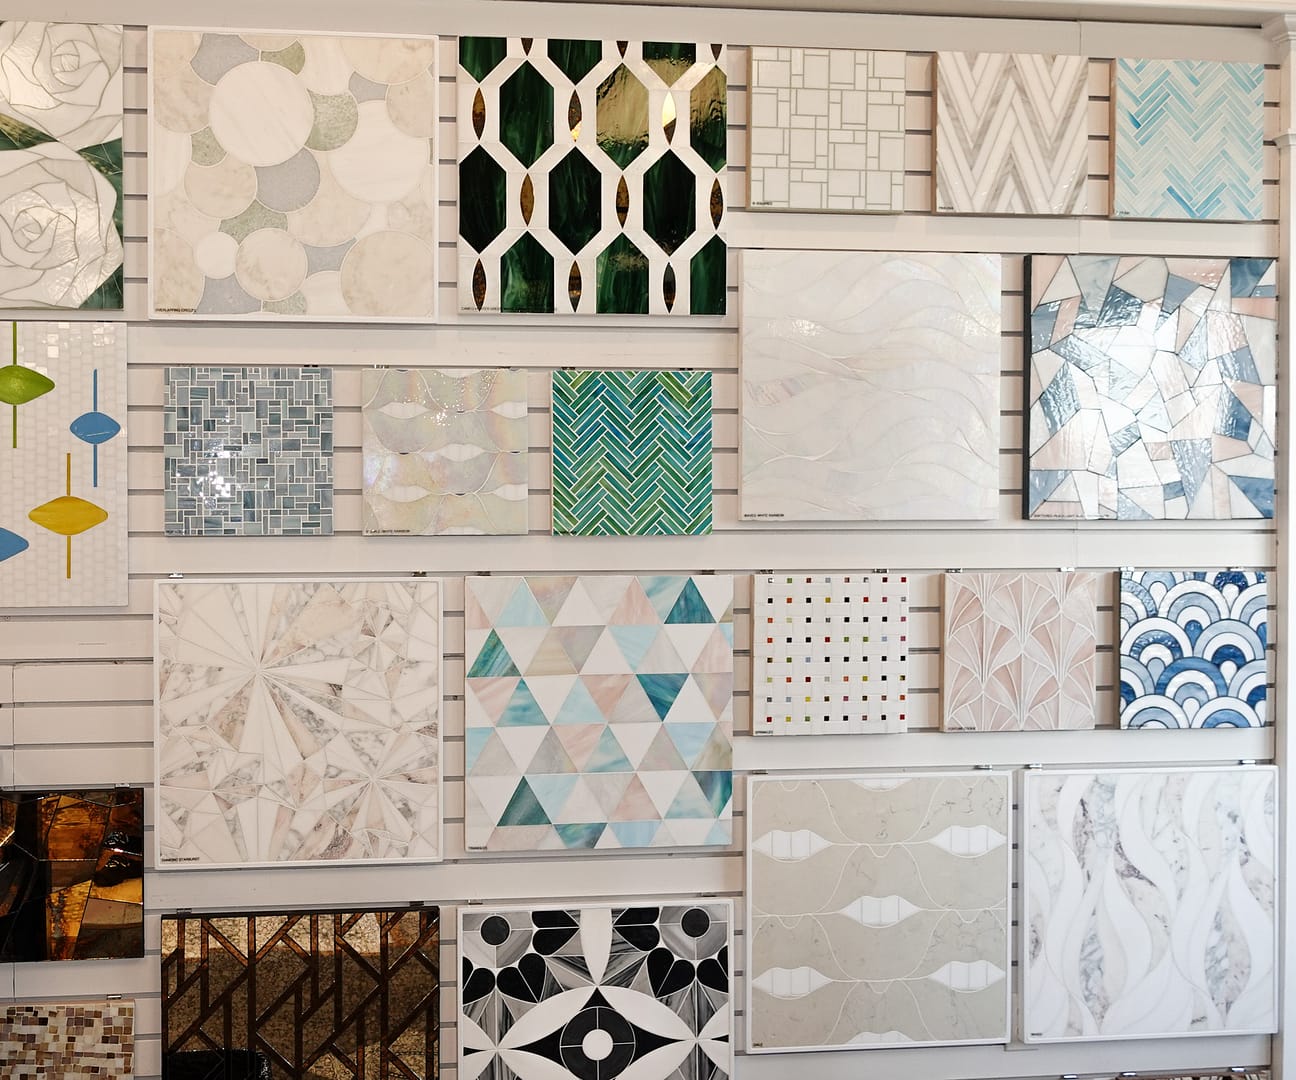 An example of high quality tile for interior designers available at the Tile By Design tile showroom in Danvers, MA